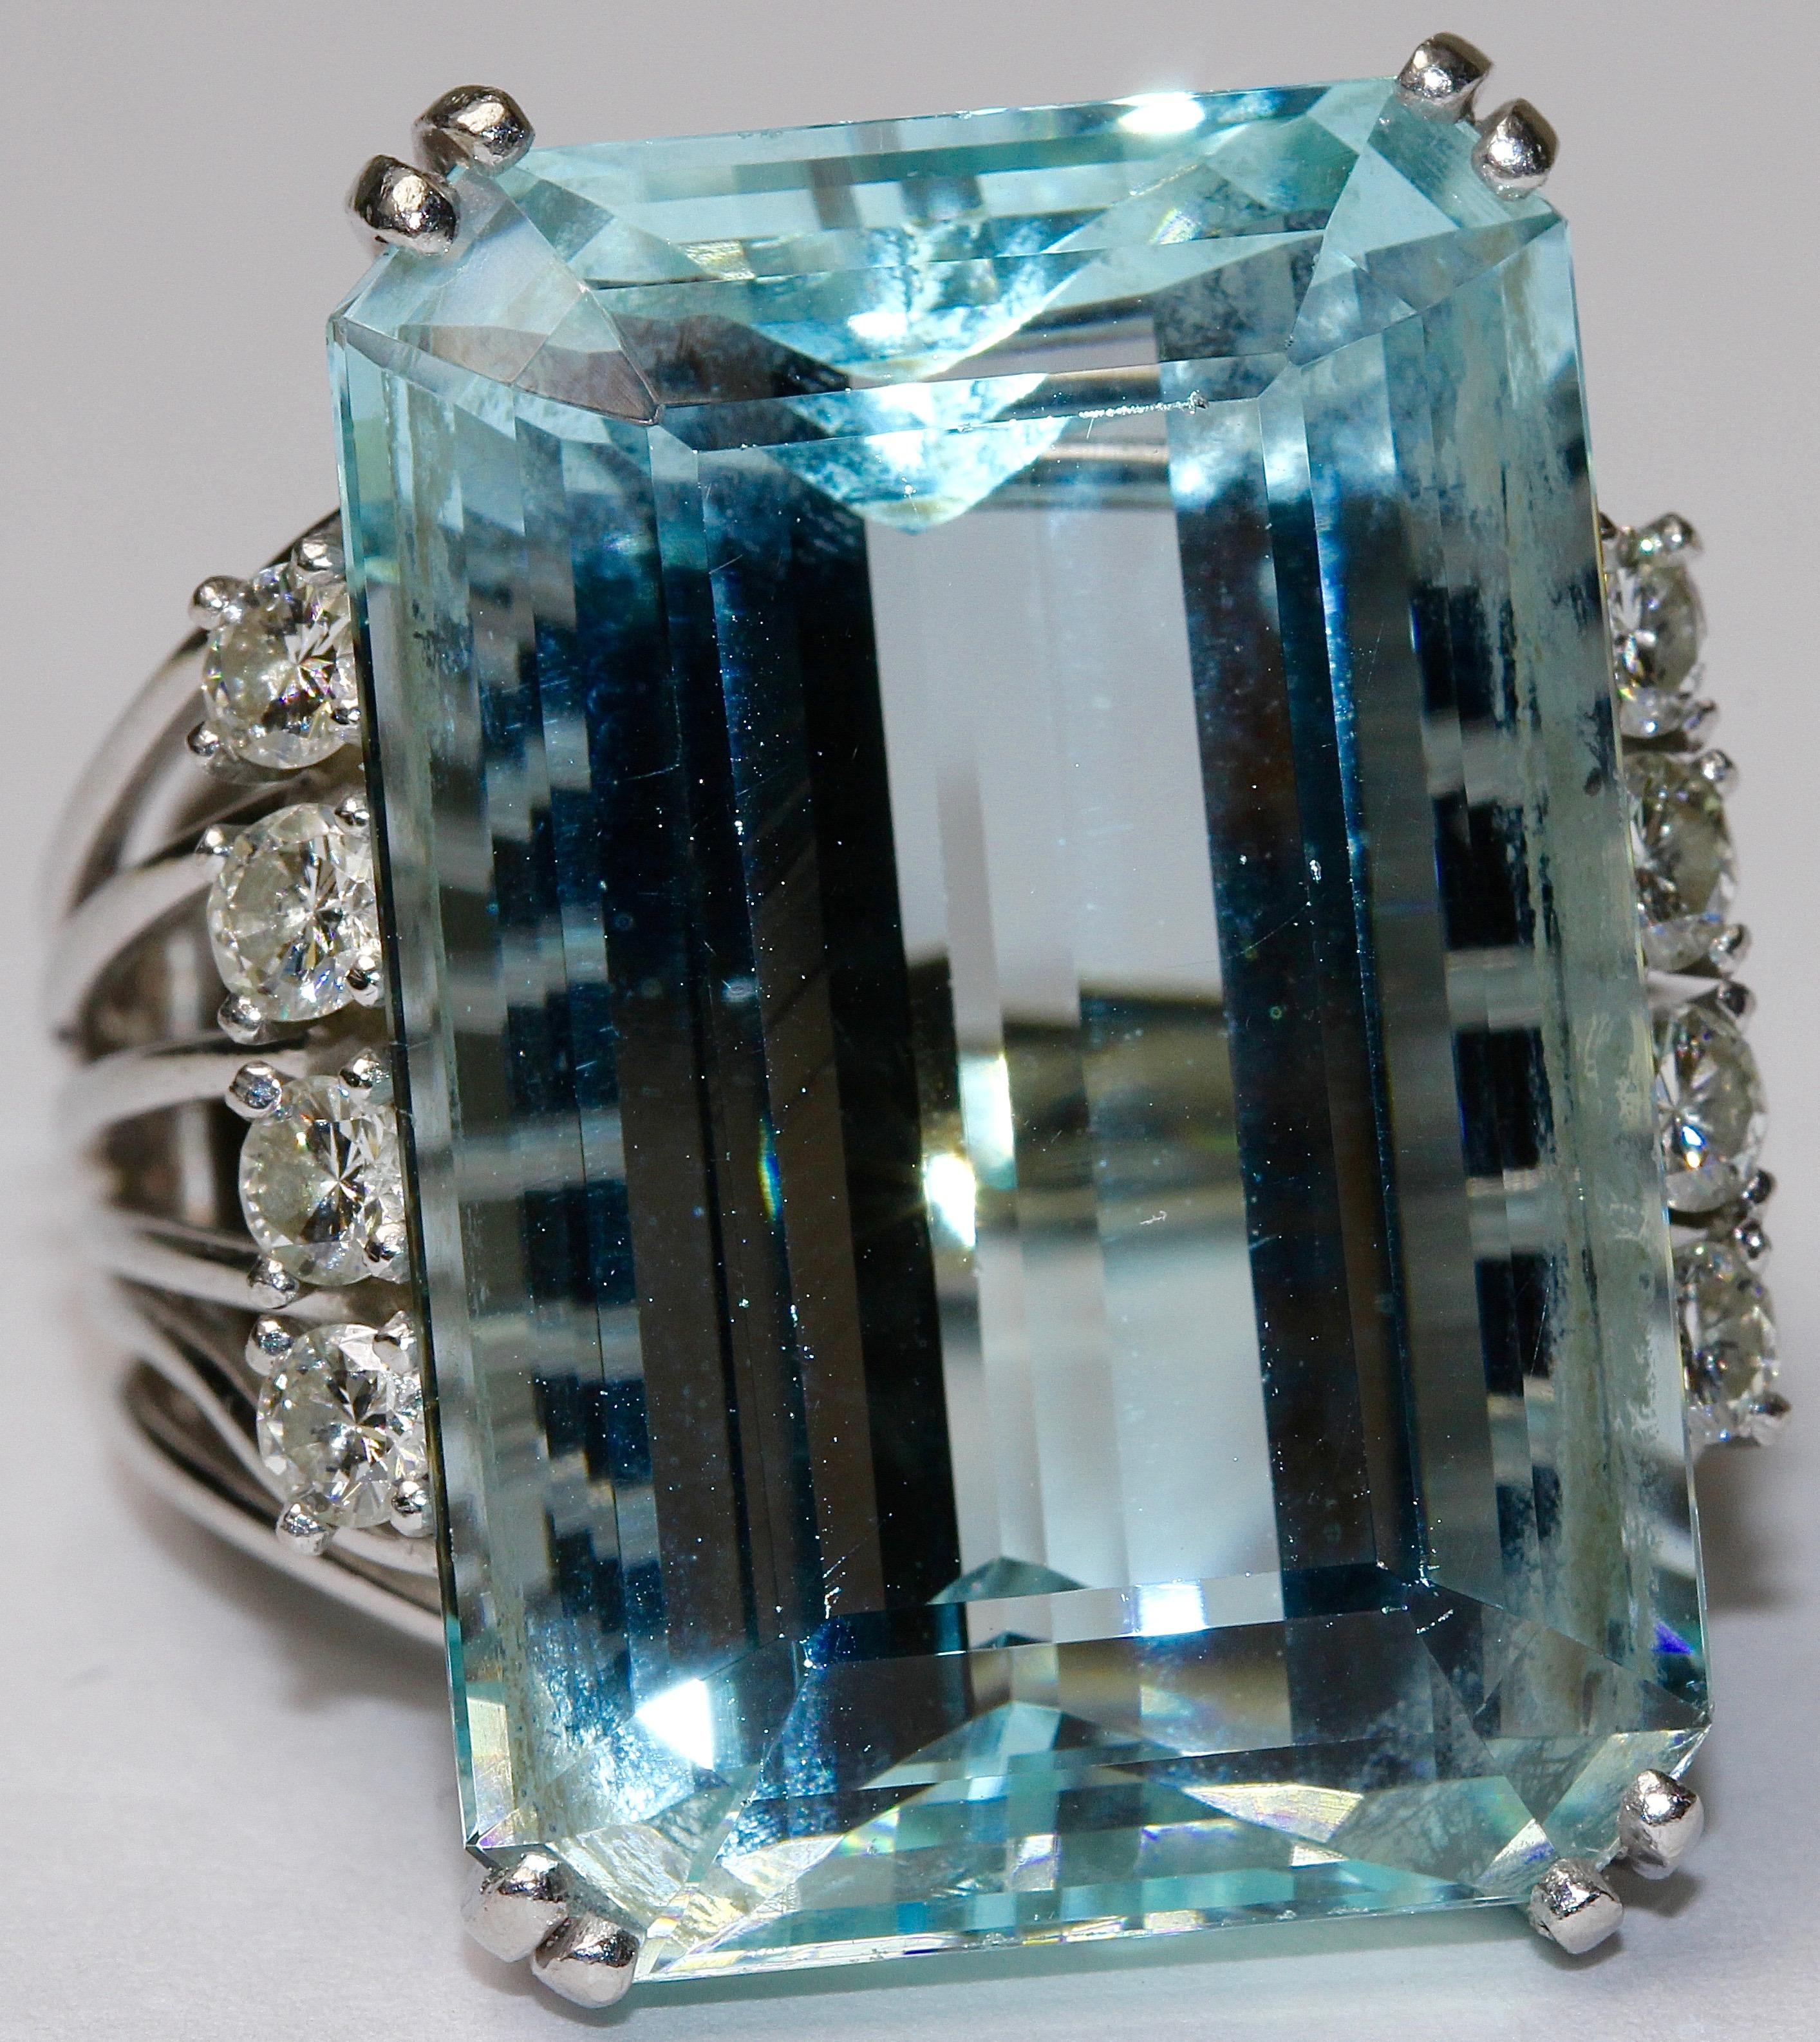 Beautiful ladies gold ring with magnificent aquamarine. 
The aquamarine is faceted and measures about 17mm x 24mm x 11mm (about 30 carats).
Additionally set with 8 diamonds in top quality and color.

14 karat white gold, hallmarked.